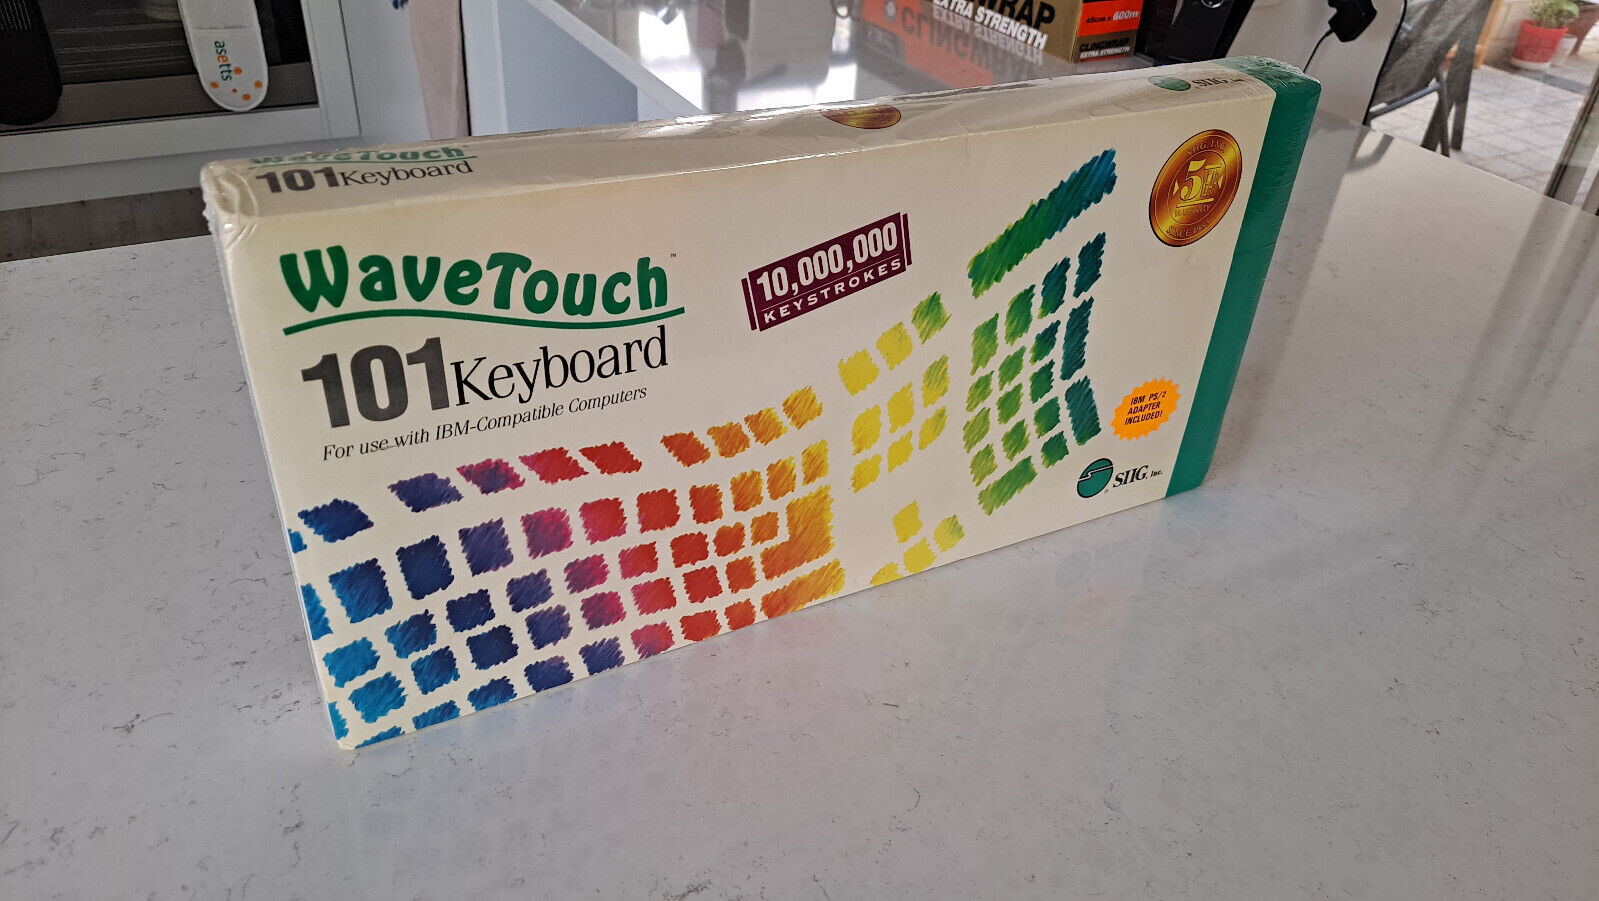 SIIG Wave Touch 101 Keyboard (BRAND NEW SEALED) Vintage rare item